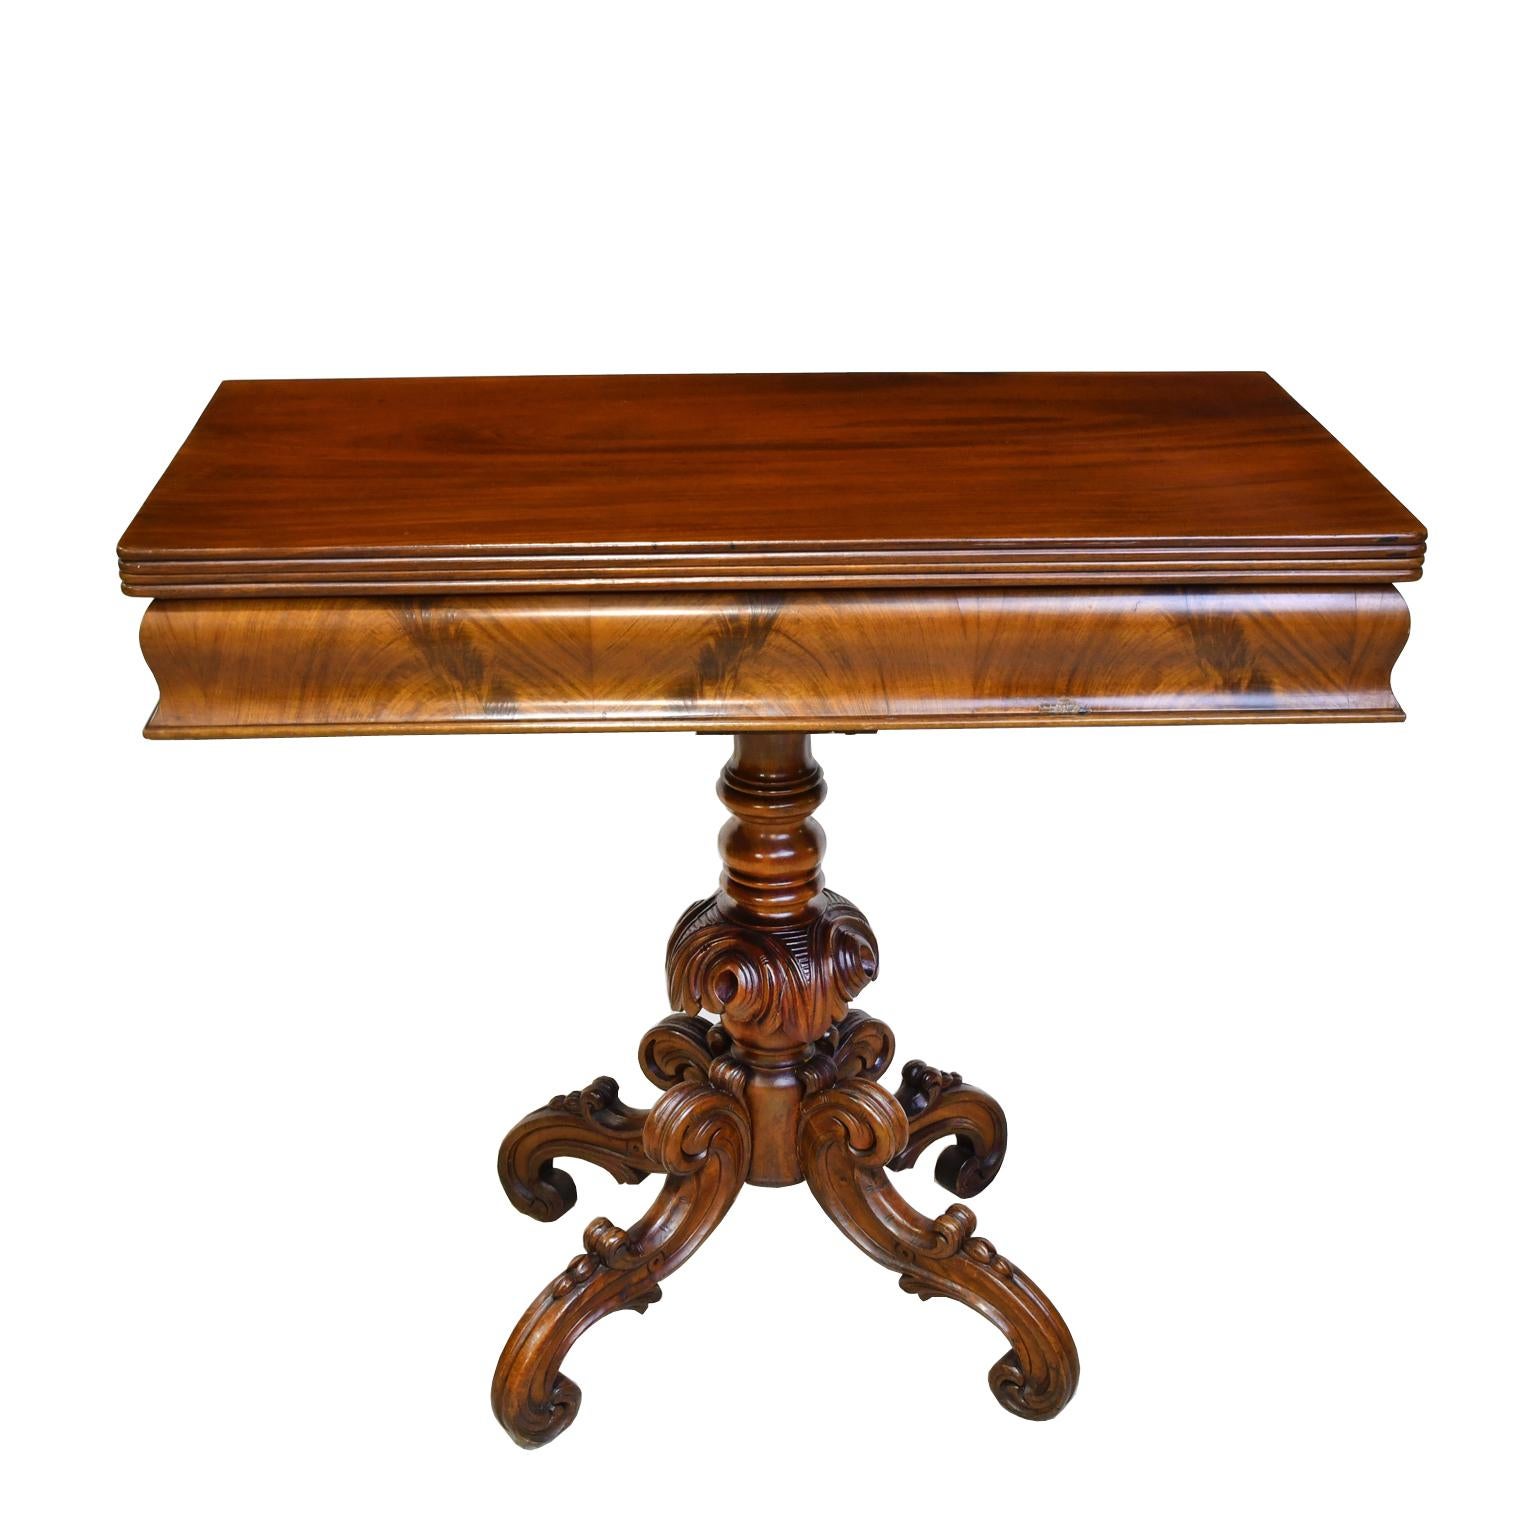 A very lovely game table in the Rococo style in mahogany. Rectangular top rests on a solid mahogany pedestal base with turned & carved acanthus post that ends in four carved 